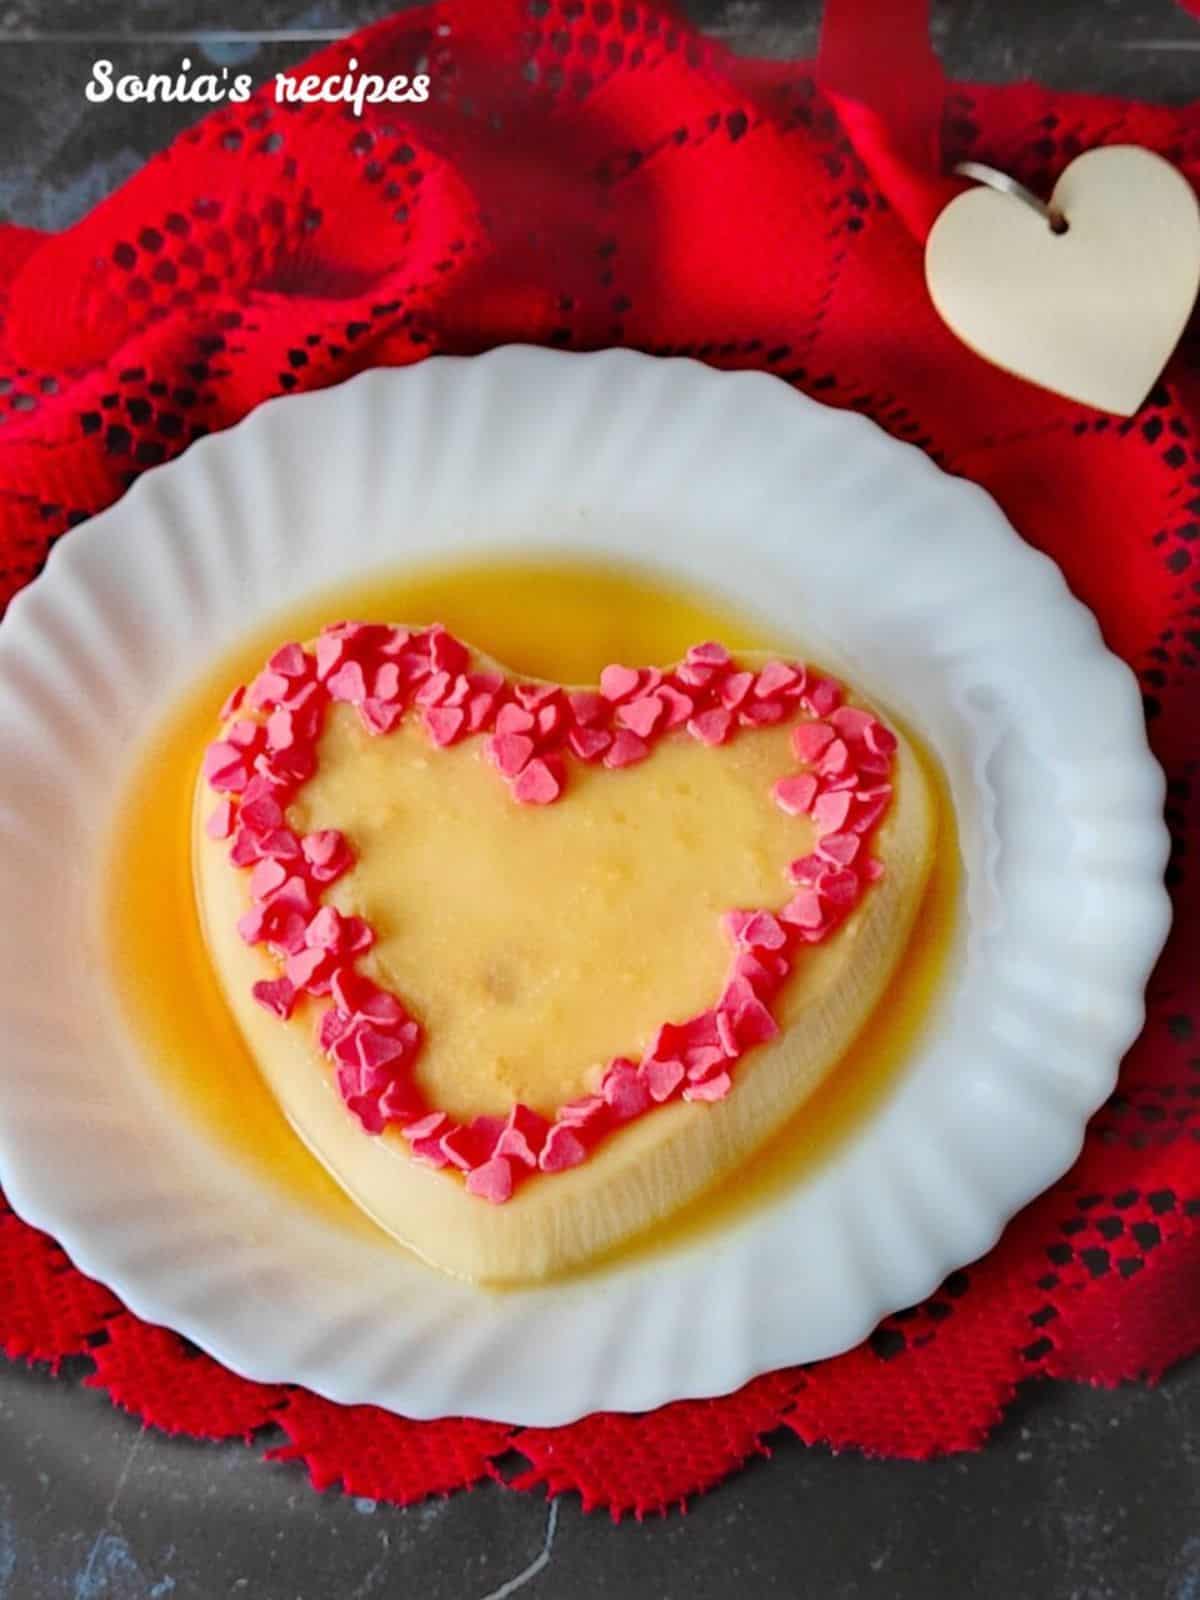 Sweet and decadent vanillla pudding heart with caramel sauce topped with pink confetti hearts